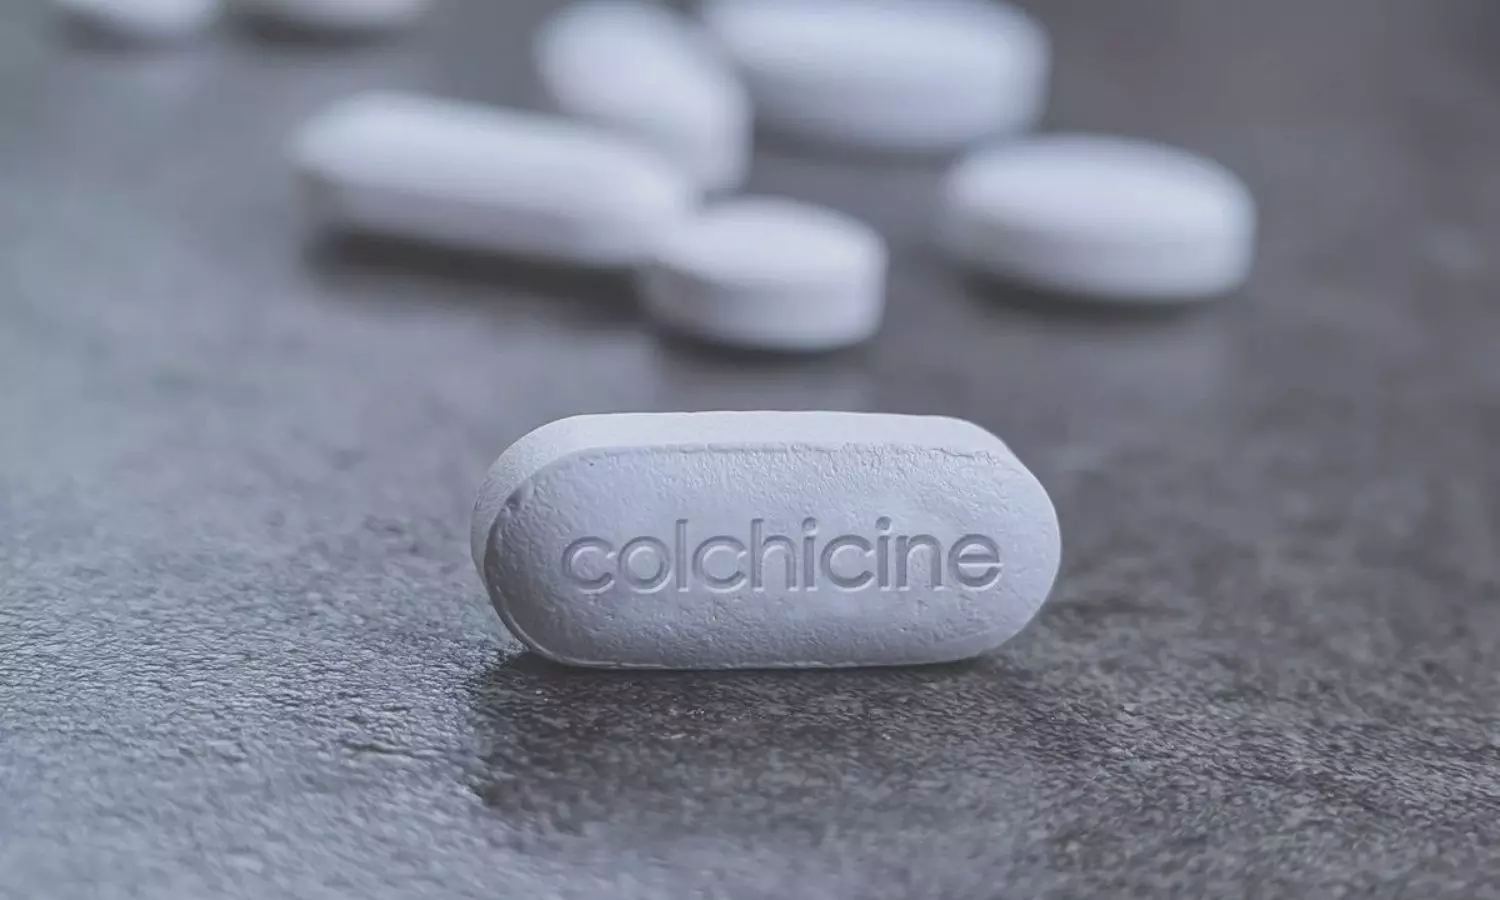 Colchicine use tied to lower risk of chronic kidney disease: Study